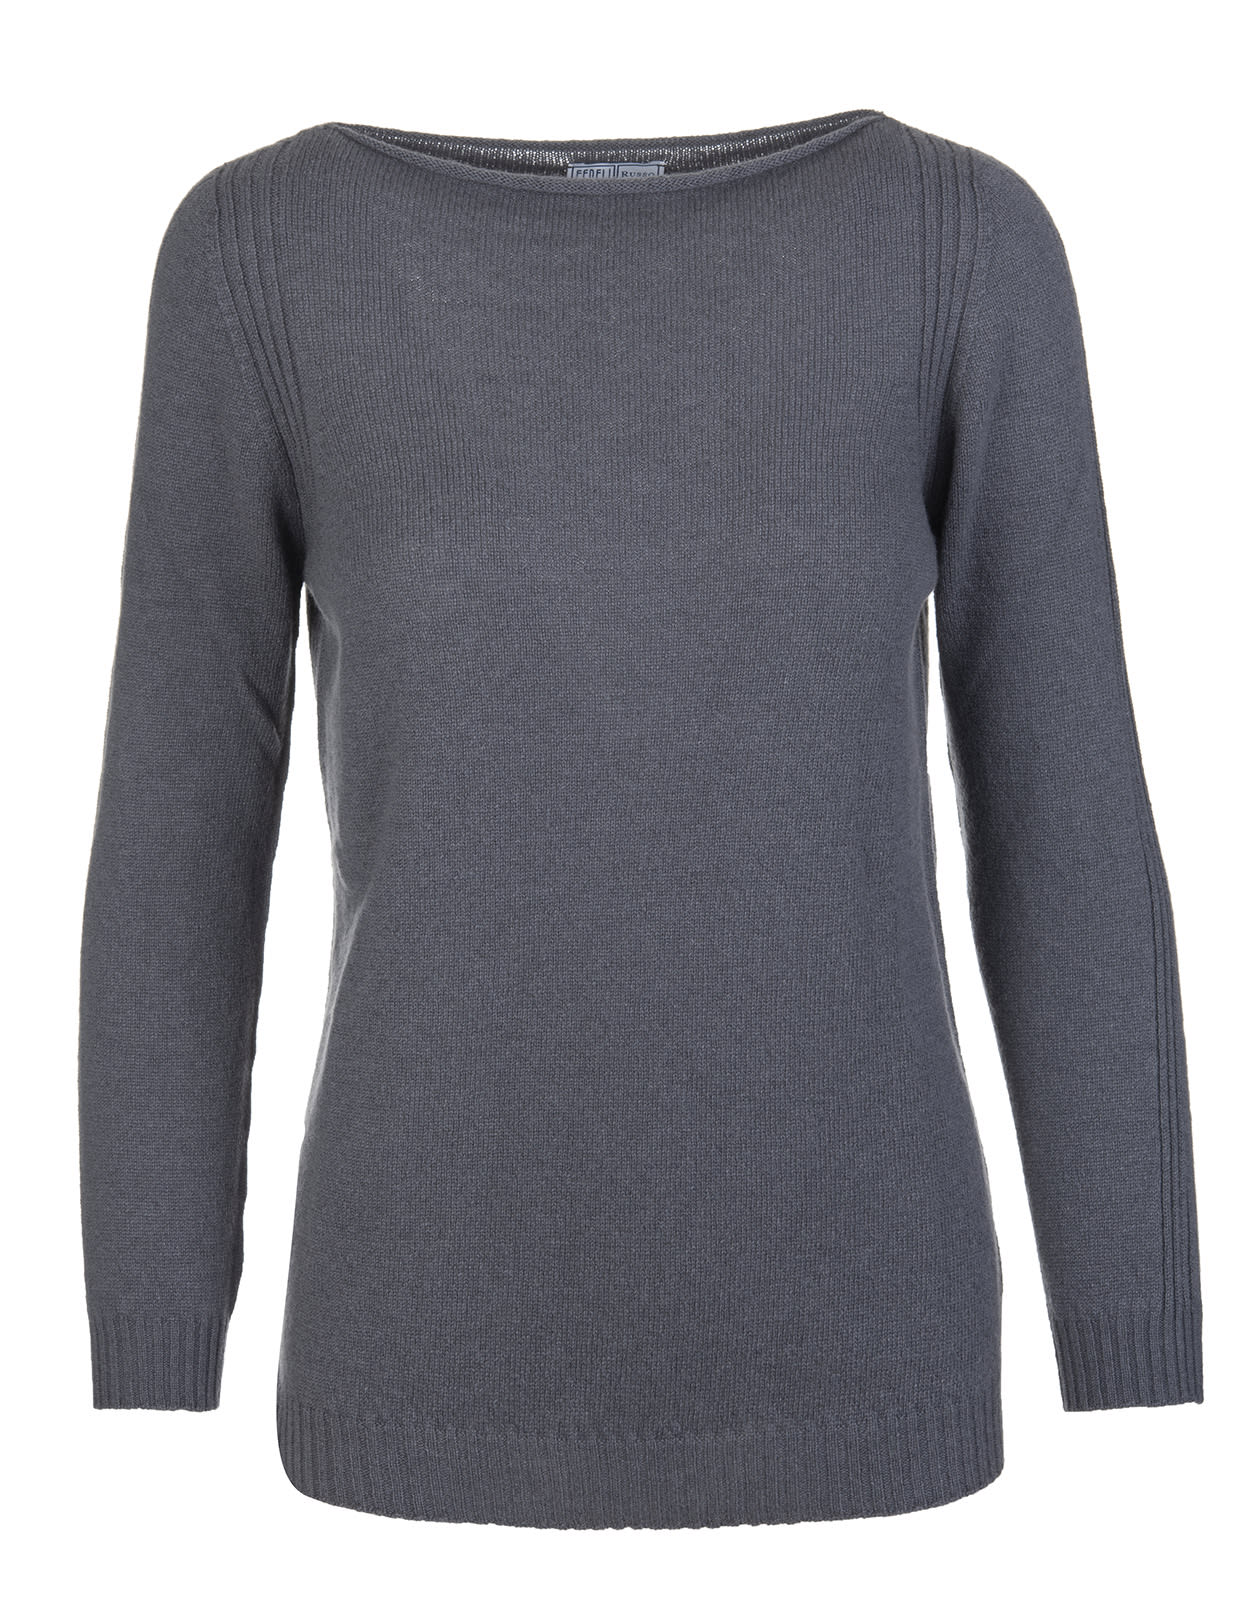 Fedeli Woman Anthracite Cashmere Pullover With Boat Neck